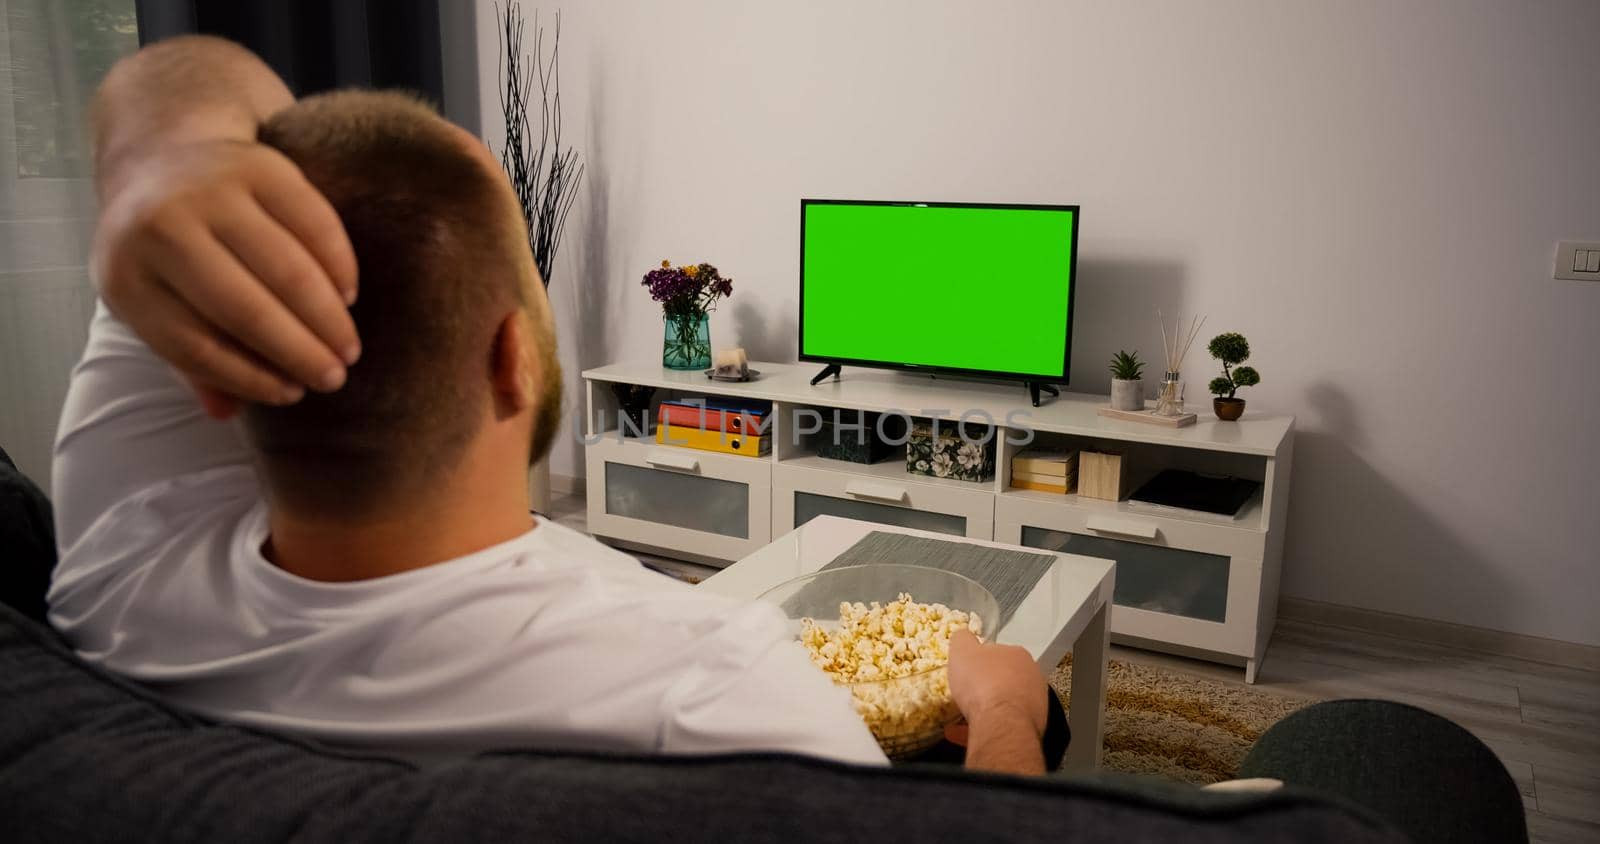 Watching Green Screen Chroma Key TV at home interior. Man Watches a Sport Match. Support favorite Football Rugby Team.